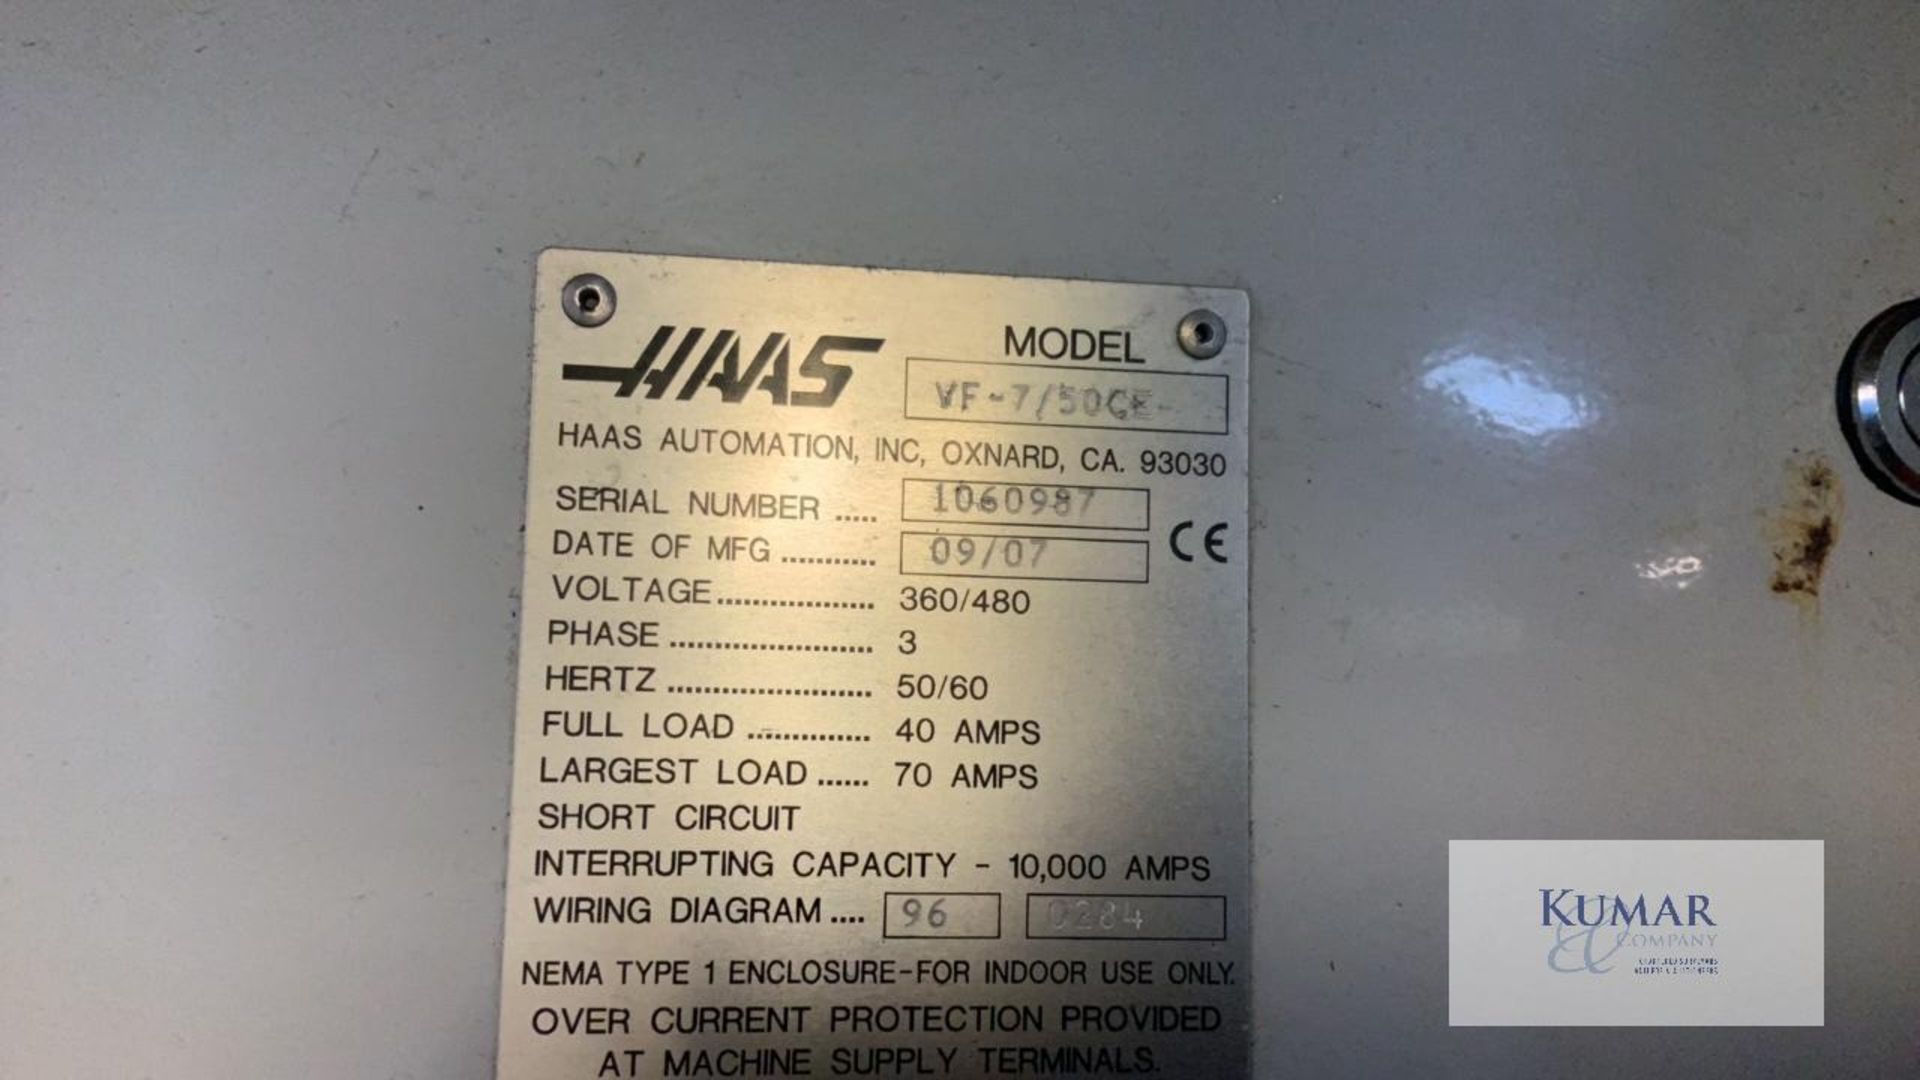 Haas VF7 /50 CE Serial No 1060987 with Haas CNC Controls and associated tooling - Image 5 of 16